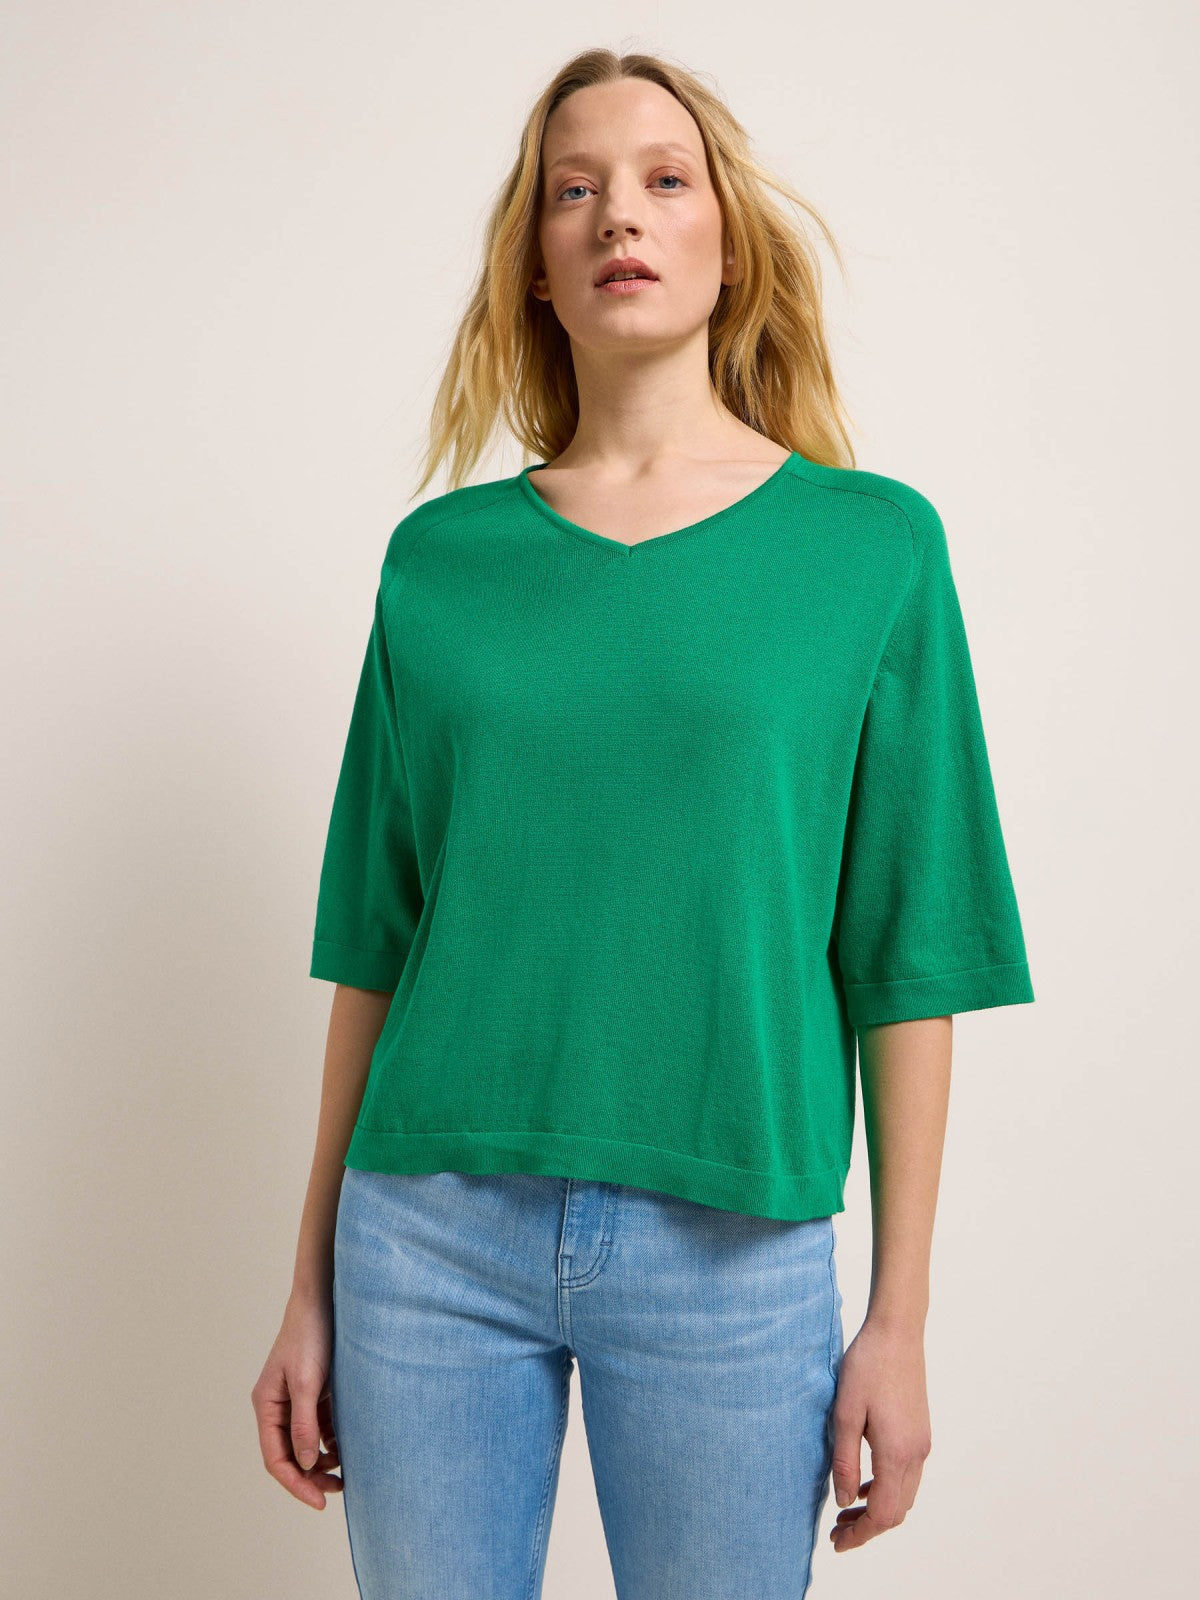 Green Knitted Organic Cotton Top